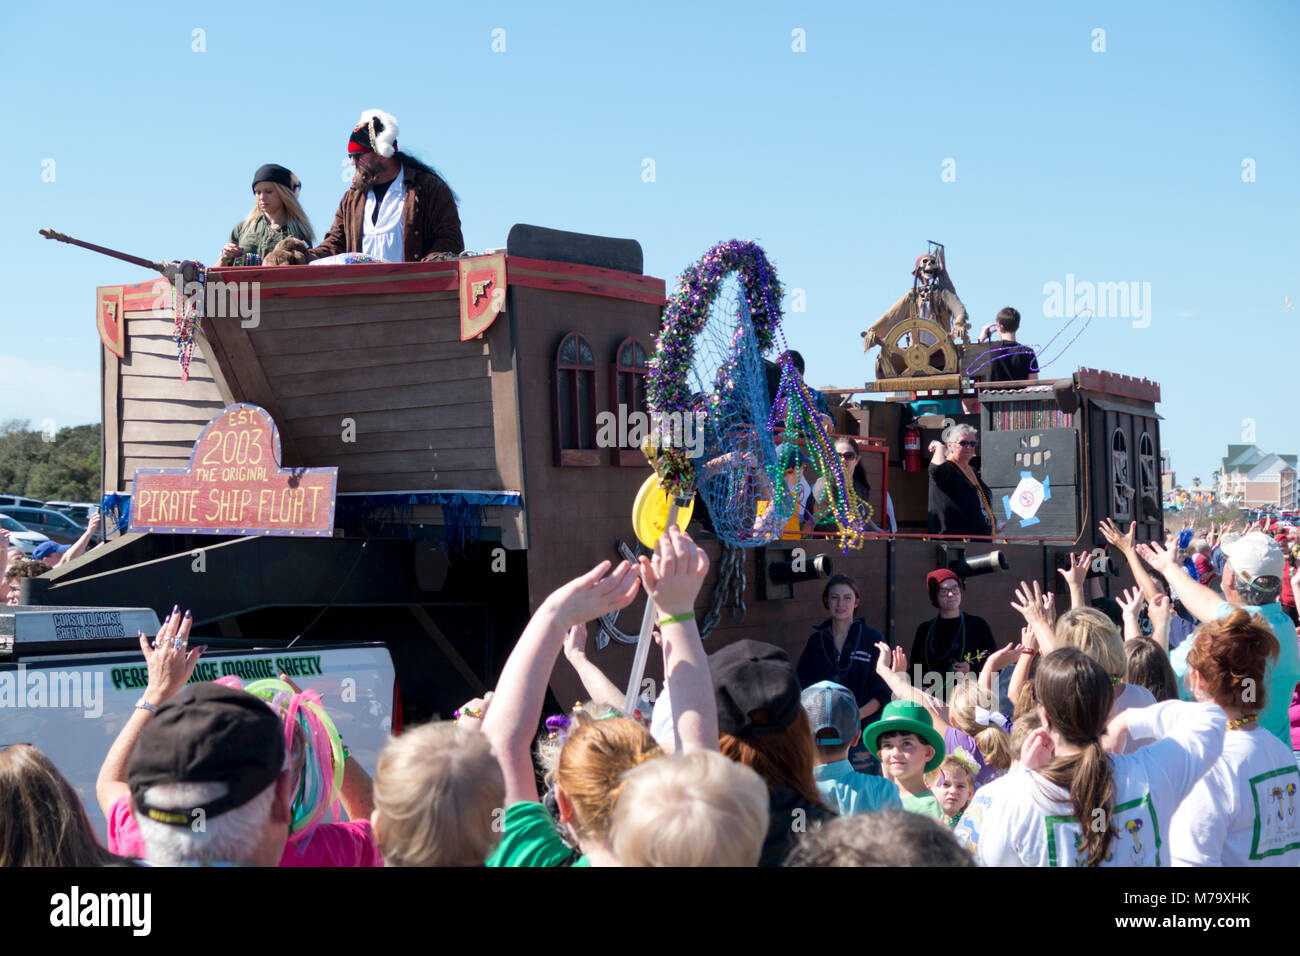 Pirate Ship Float in the Gulf Shores Mardi Gras Parade, February 2018. Stock Photo